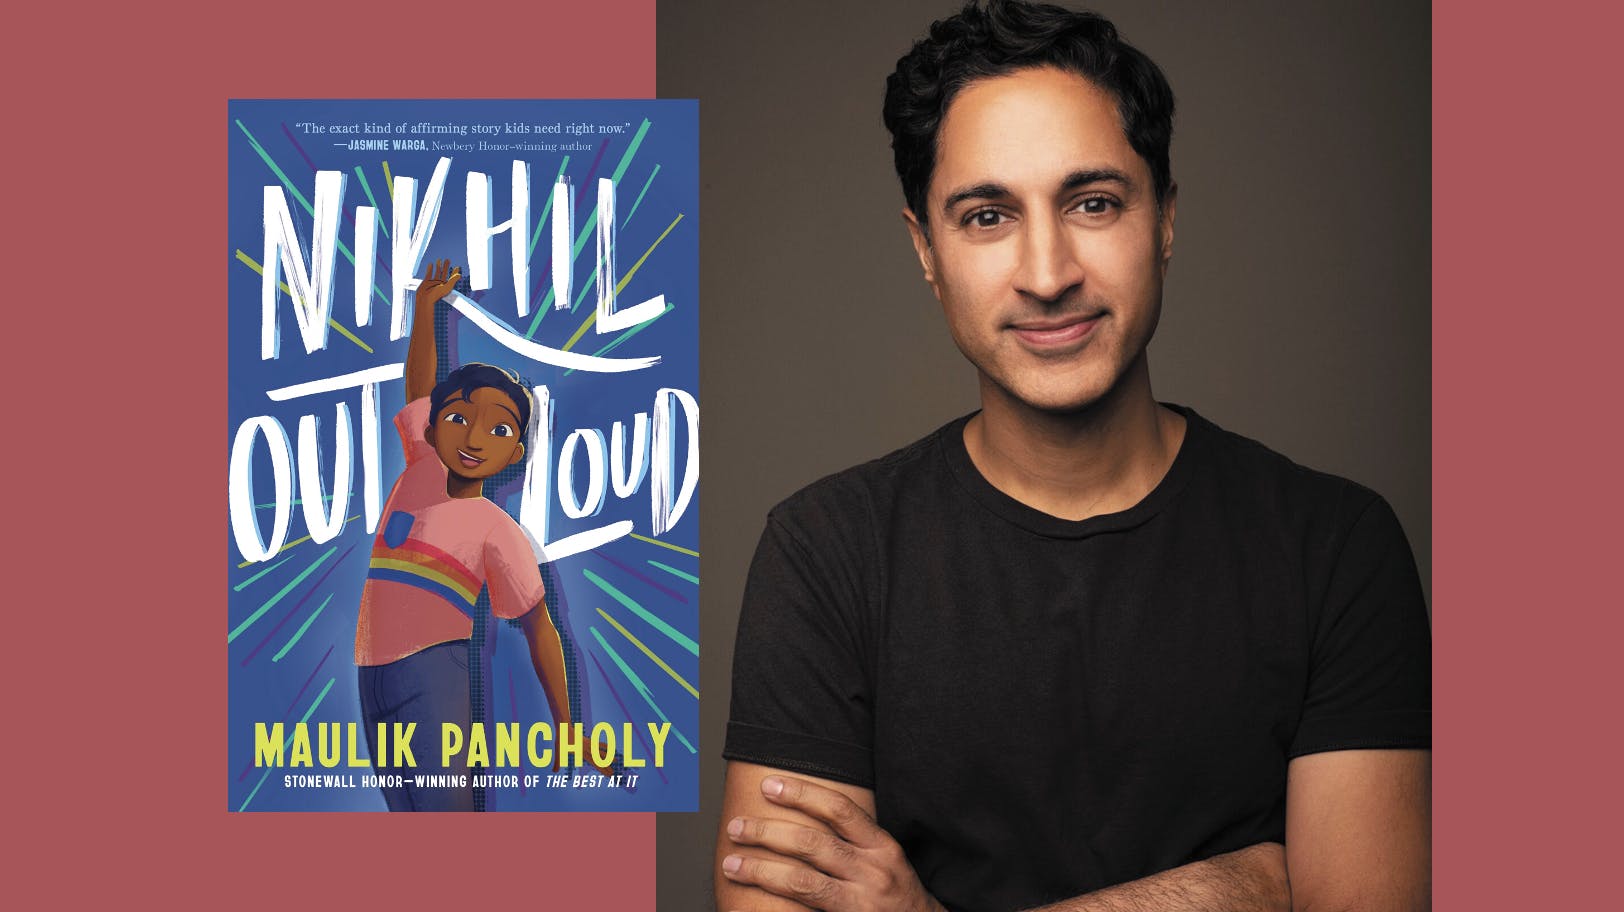 Haters Tried to Silence Maulik Pancholy. He Got Louder.